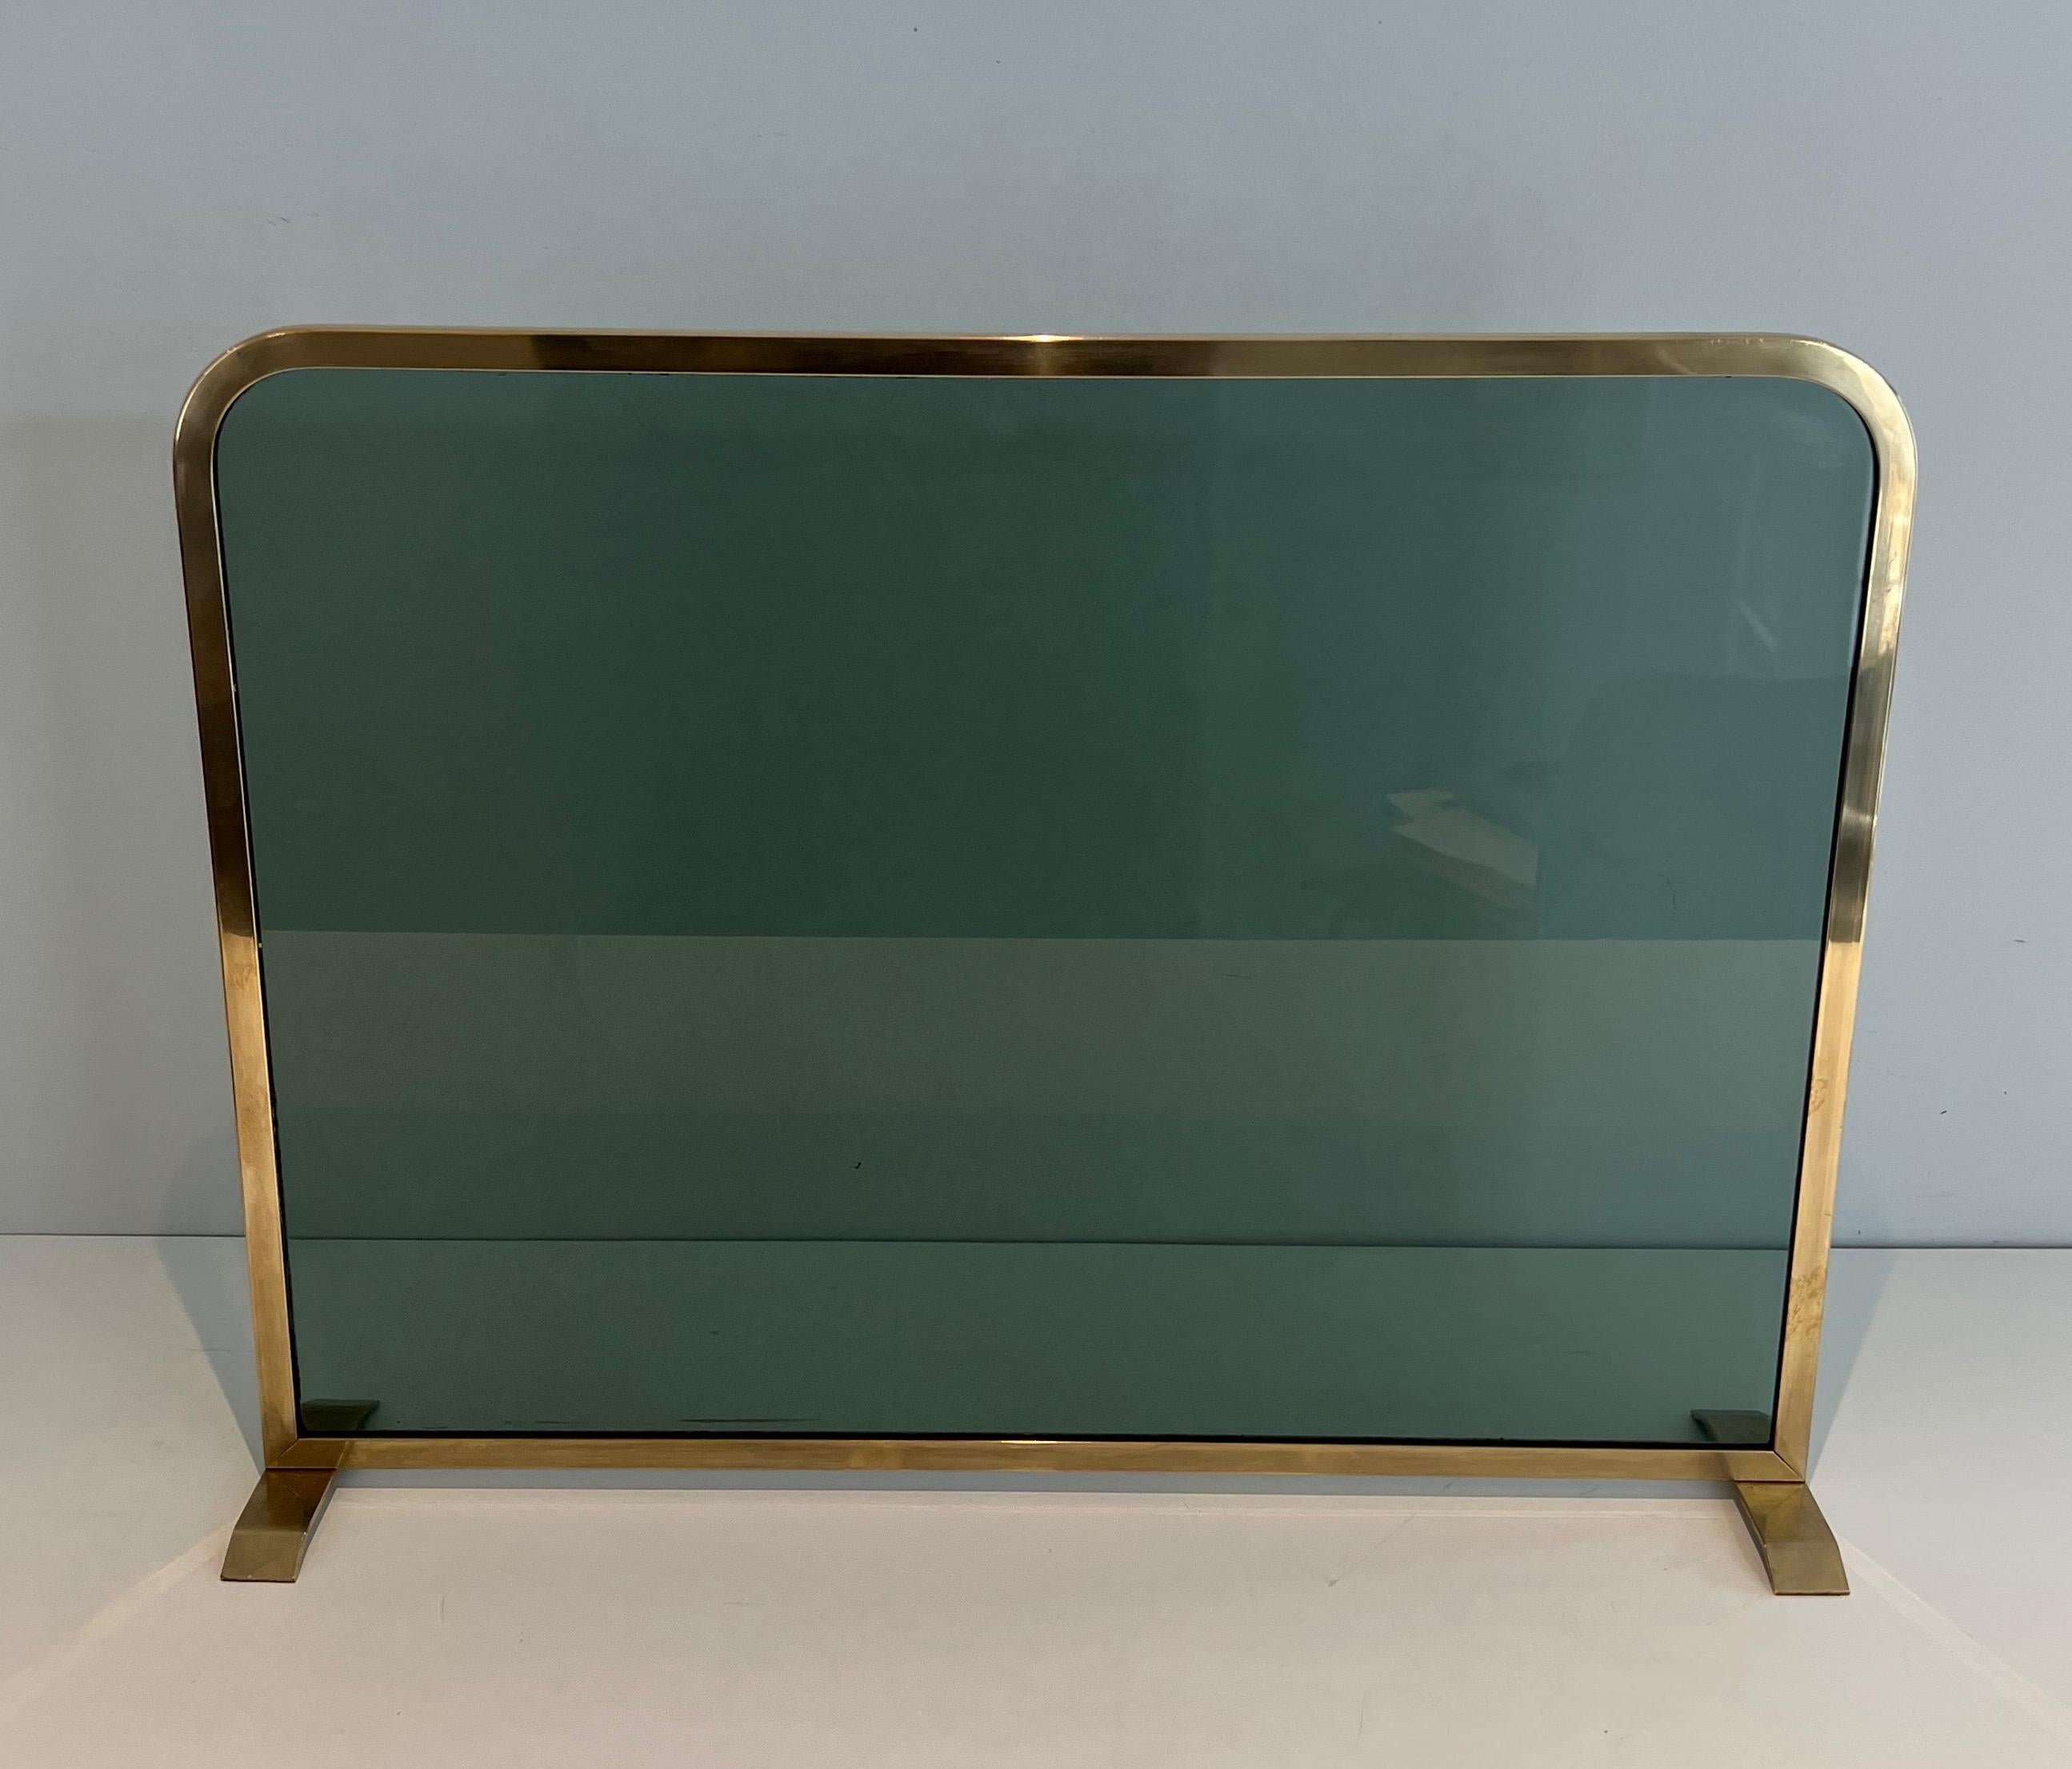 Fireplace Screen Made of a Greenish Glass Panel Surrounded by a Brass Frame For Sale 6